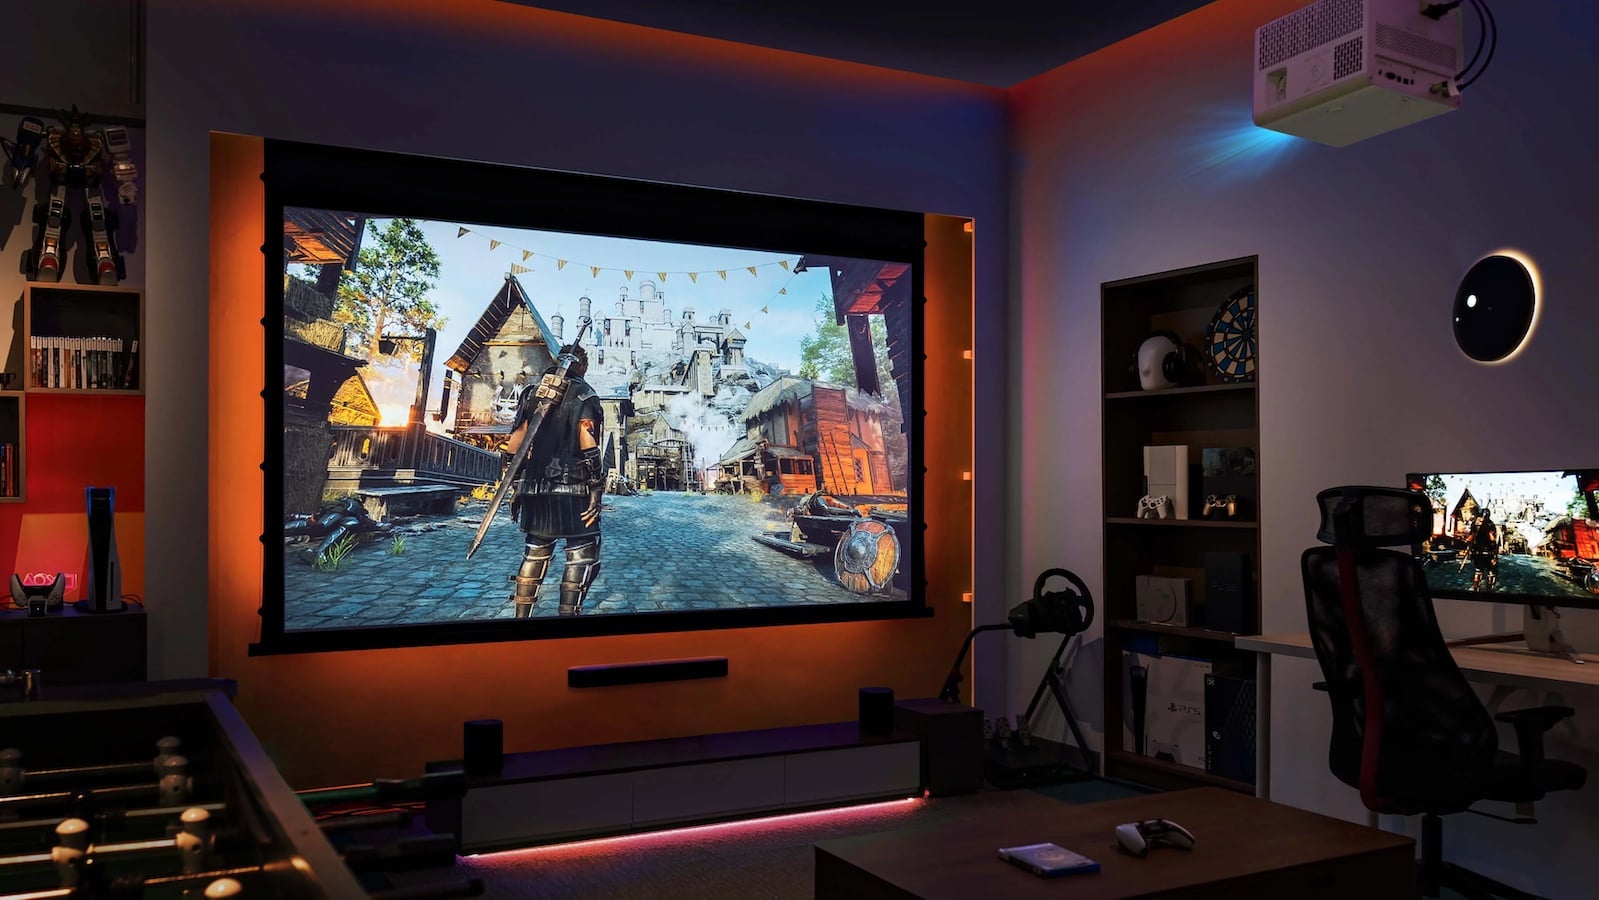 The BenQ X3100i projector creates immersive worlds on walls